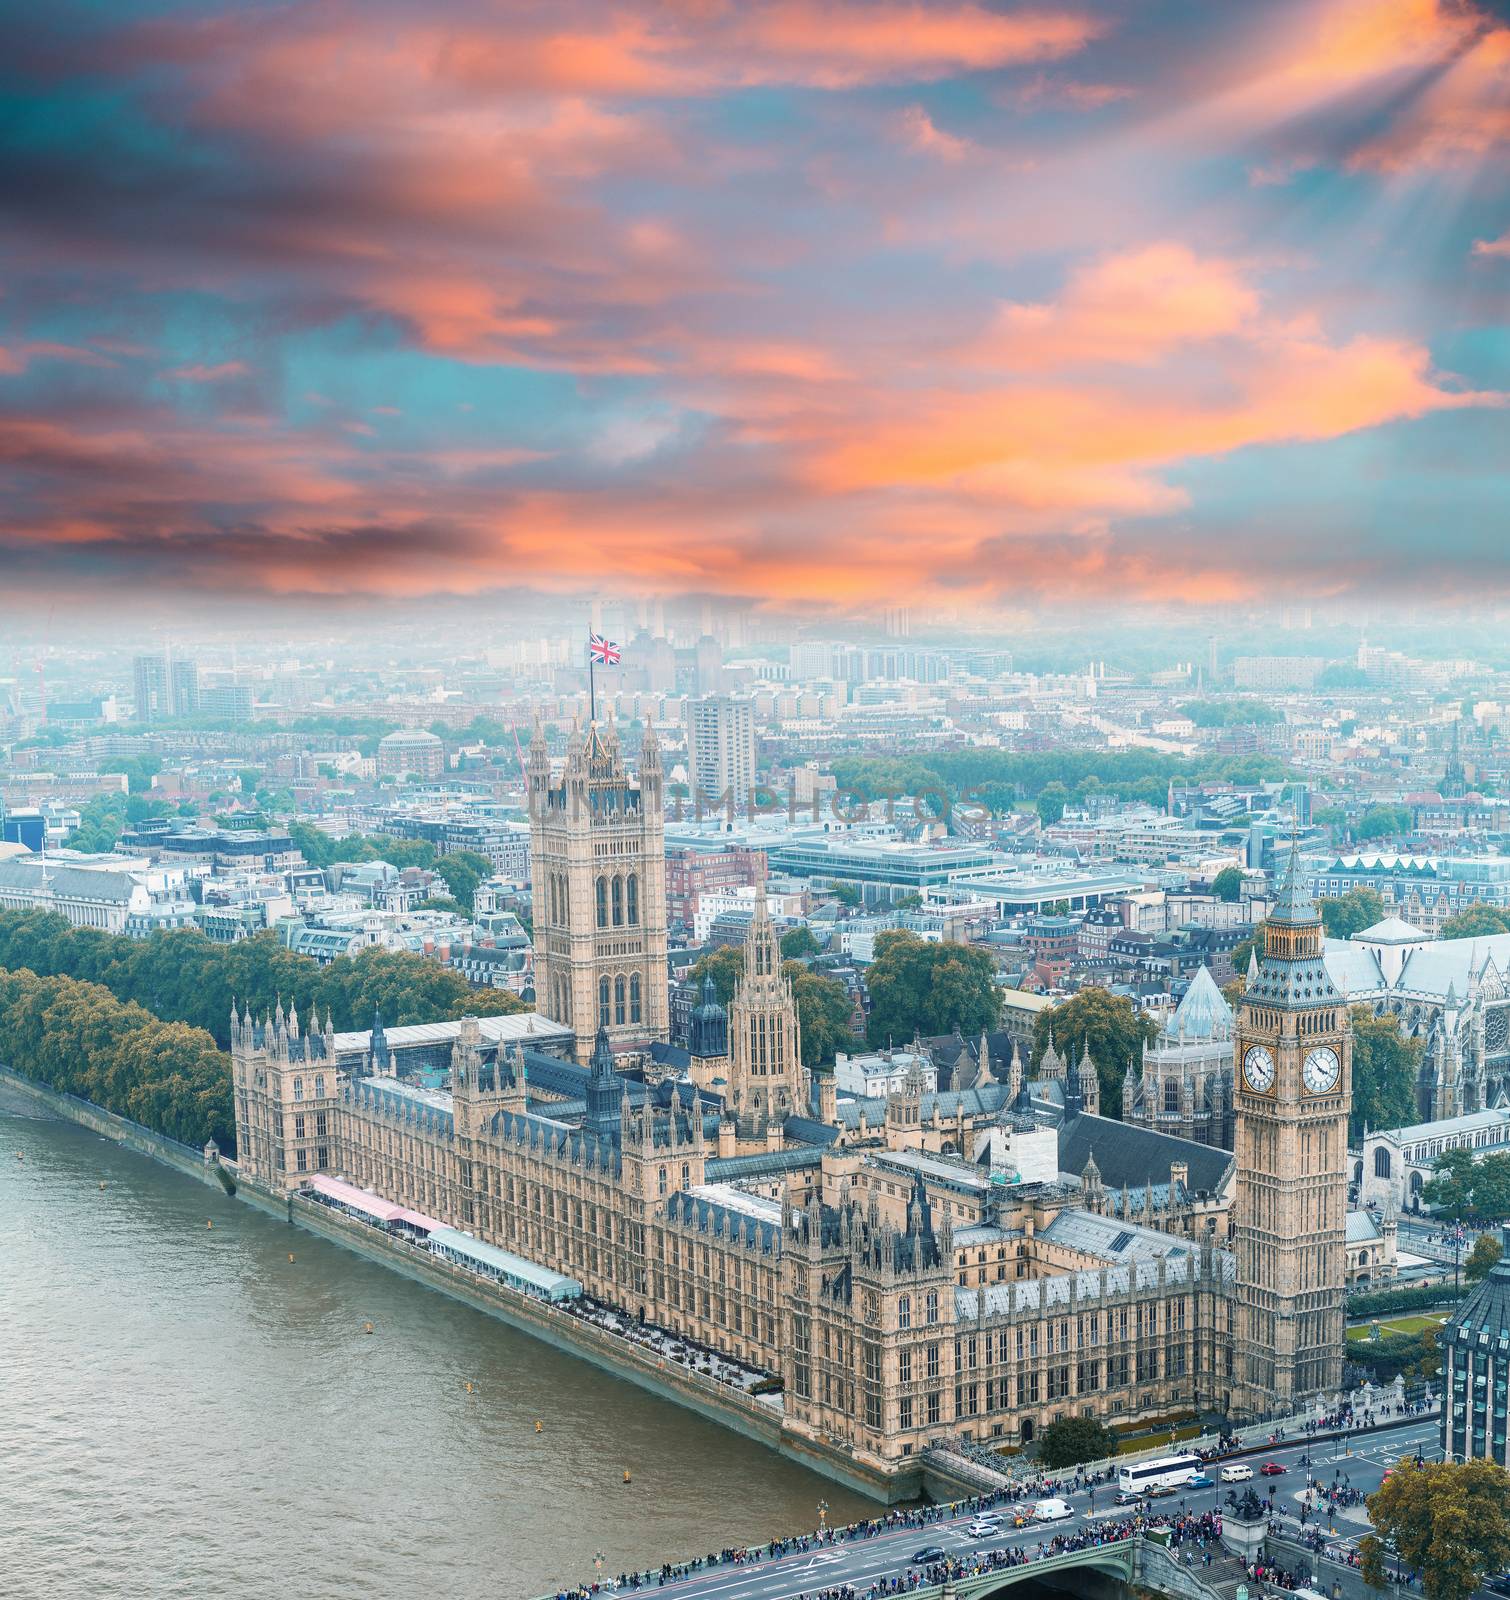 Wonderful aerial view of Big Ben and Houses of Parliament in Westminster - London - UK.